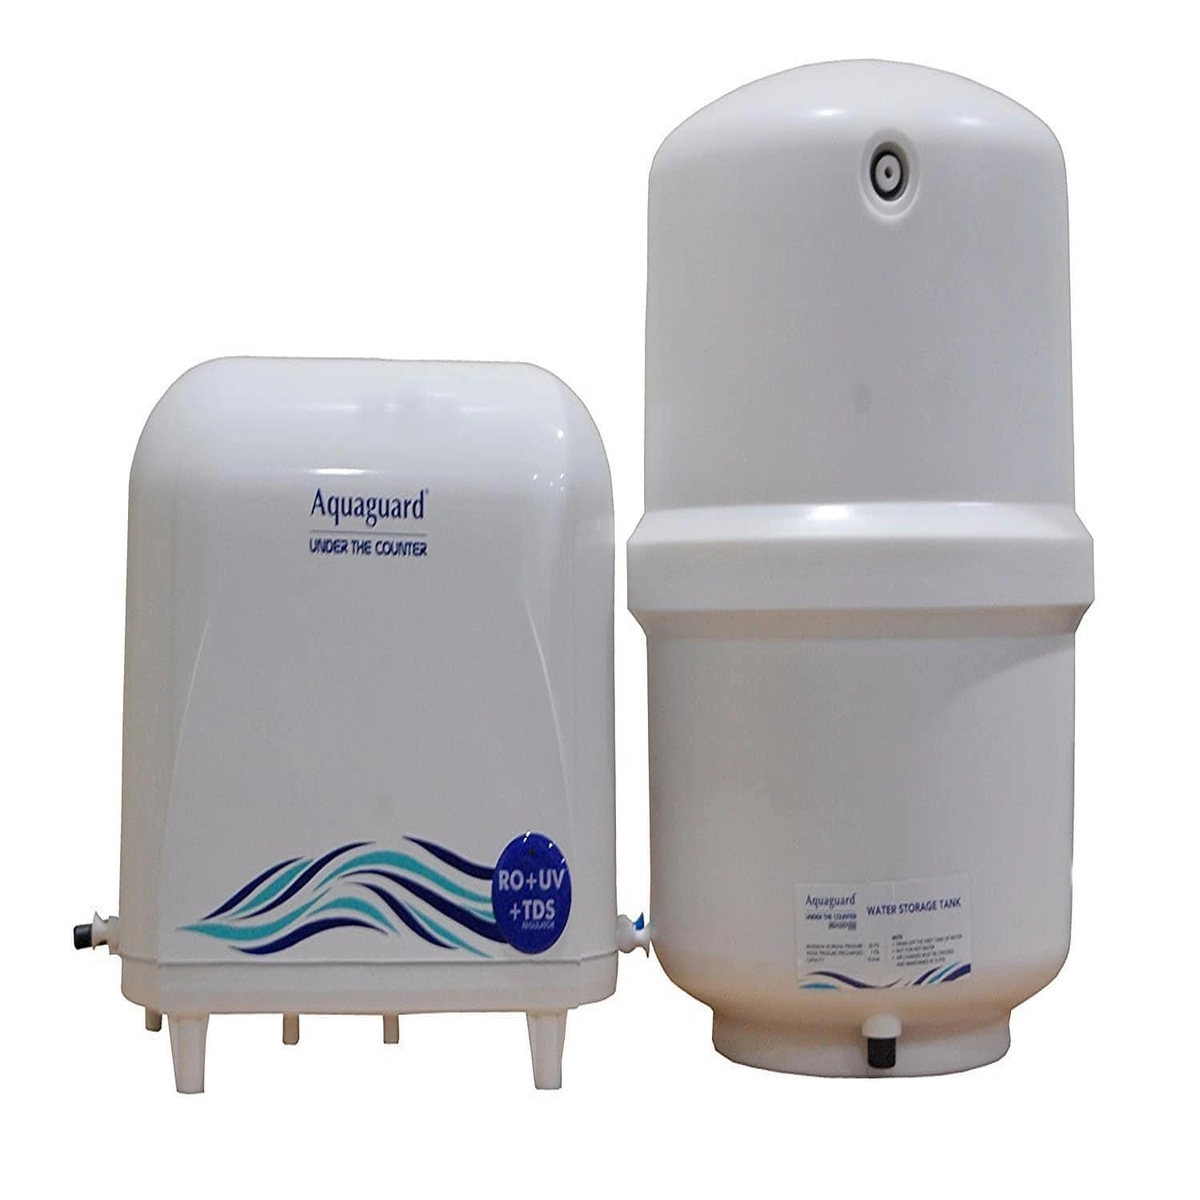 Why Is It Important to Get Your RO,UV,UF Water Purifier Serviced - Eureka  Forbes